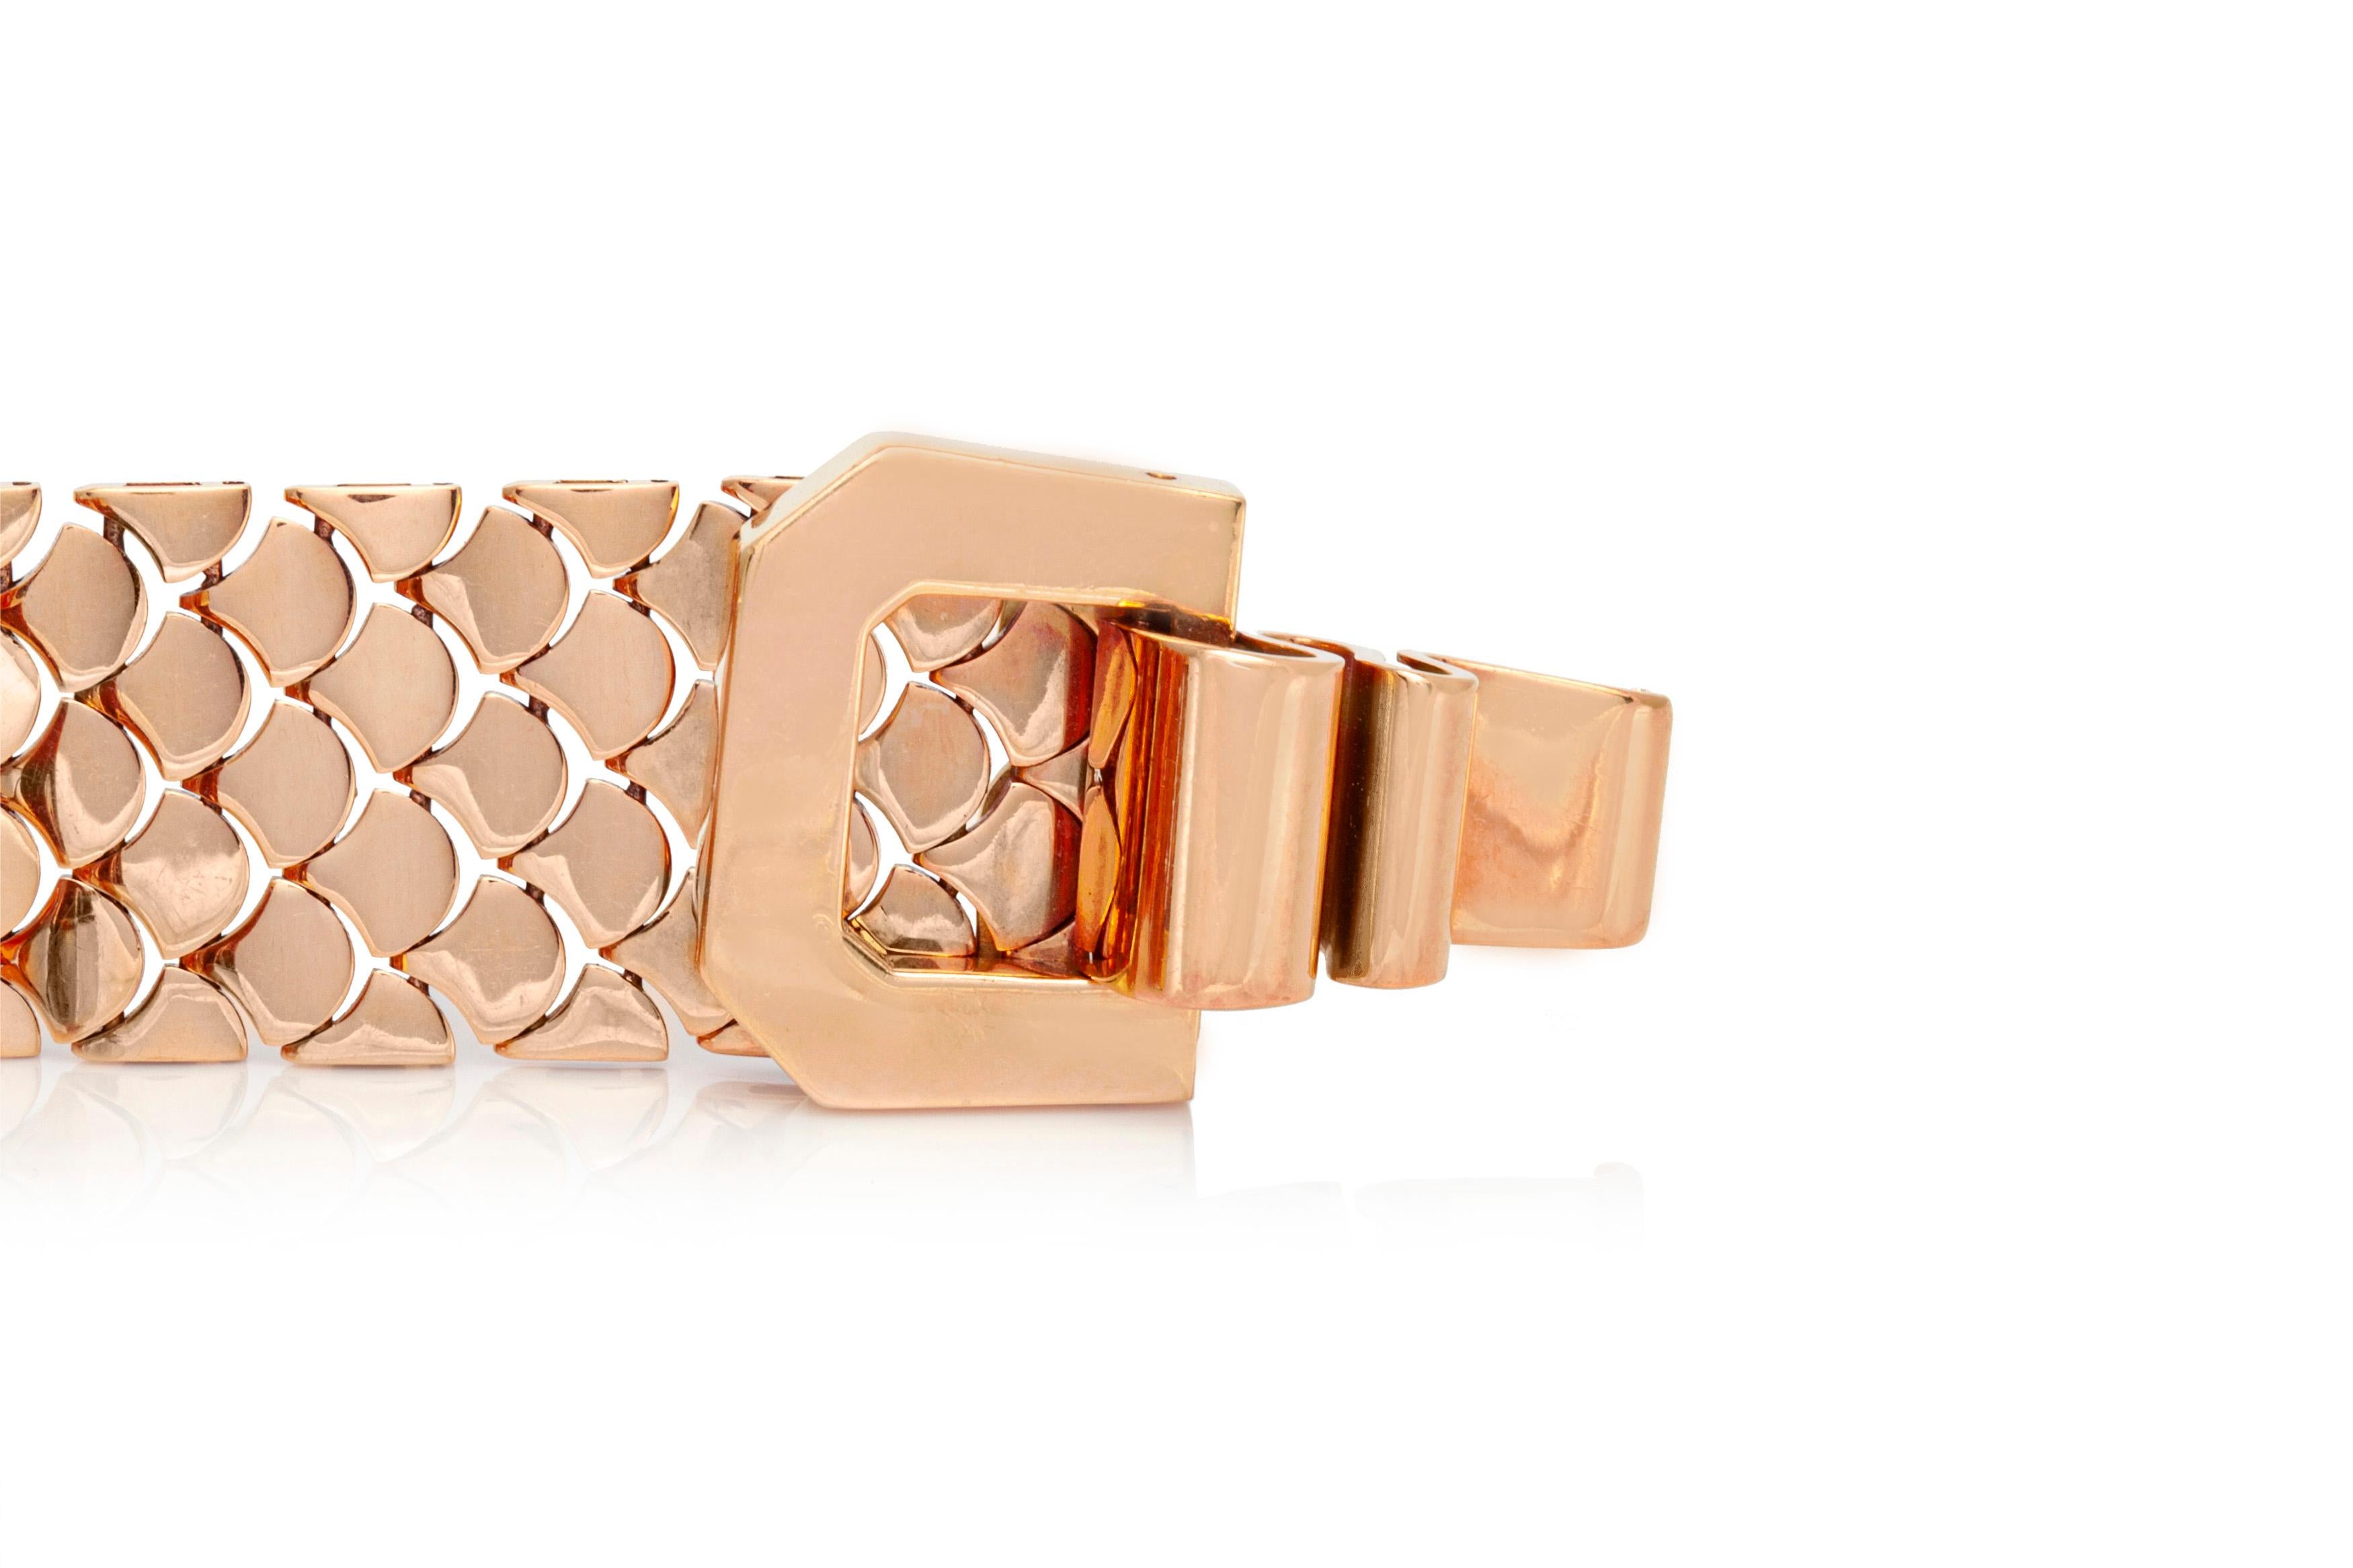 French bracelet, finely crafted in 18k yellow gold weighing 70.7 DWT.